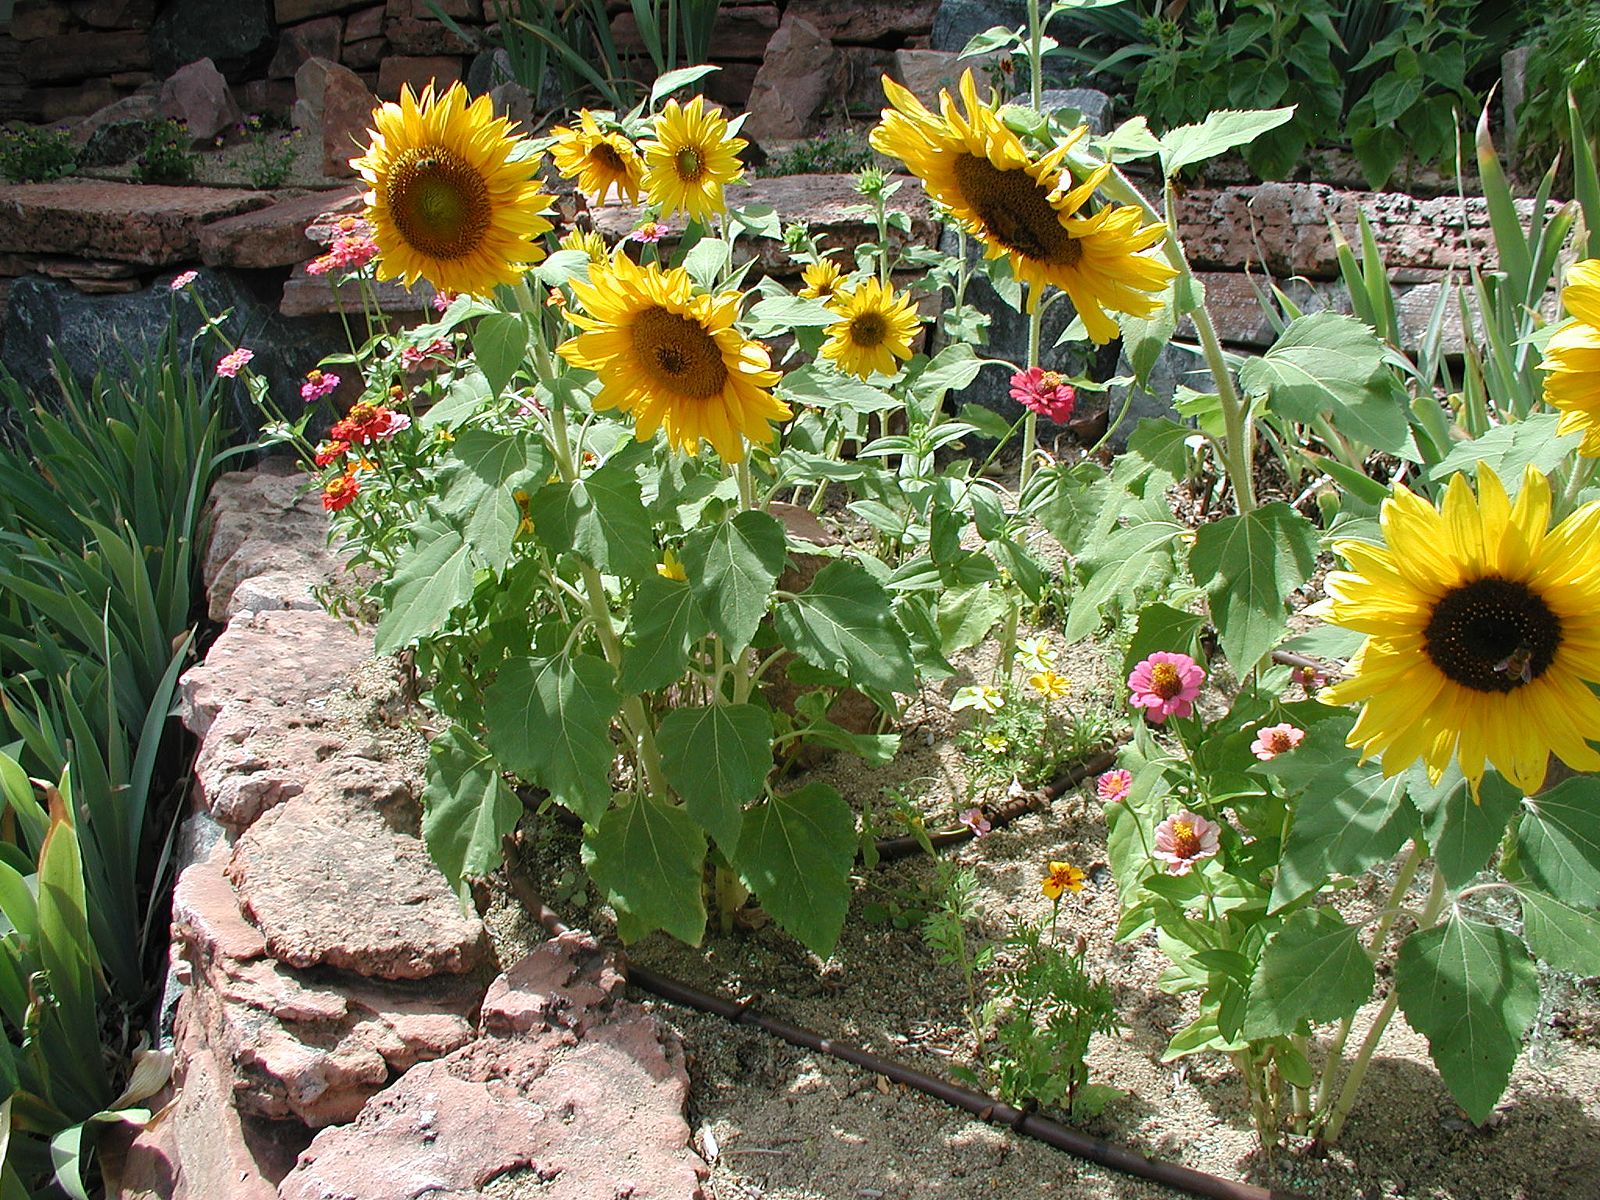 A sand flower garden with sunflowers and pulse drip irrigation